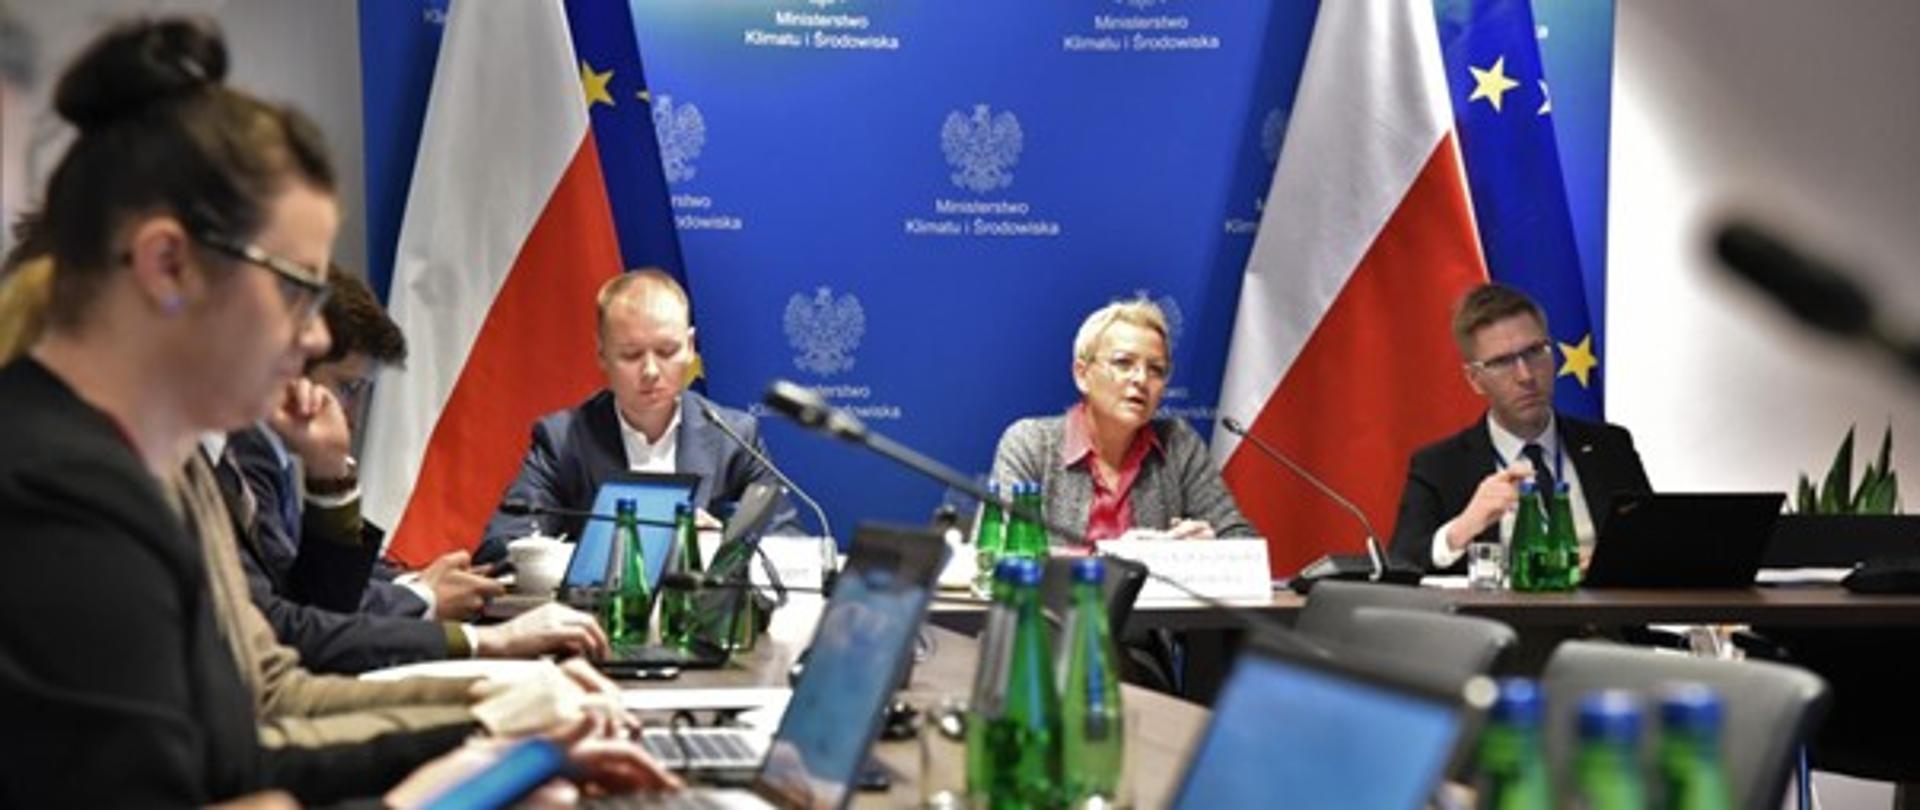 Videoconference of the Polish-Ukrainian Working Group for Energy